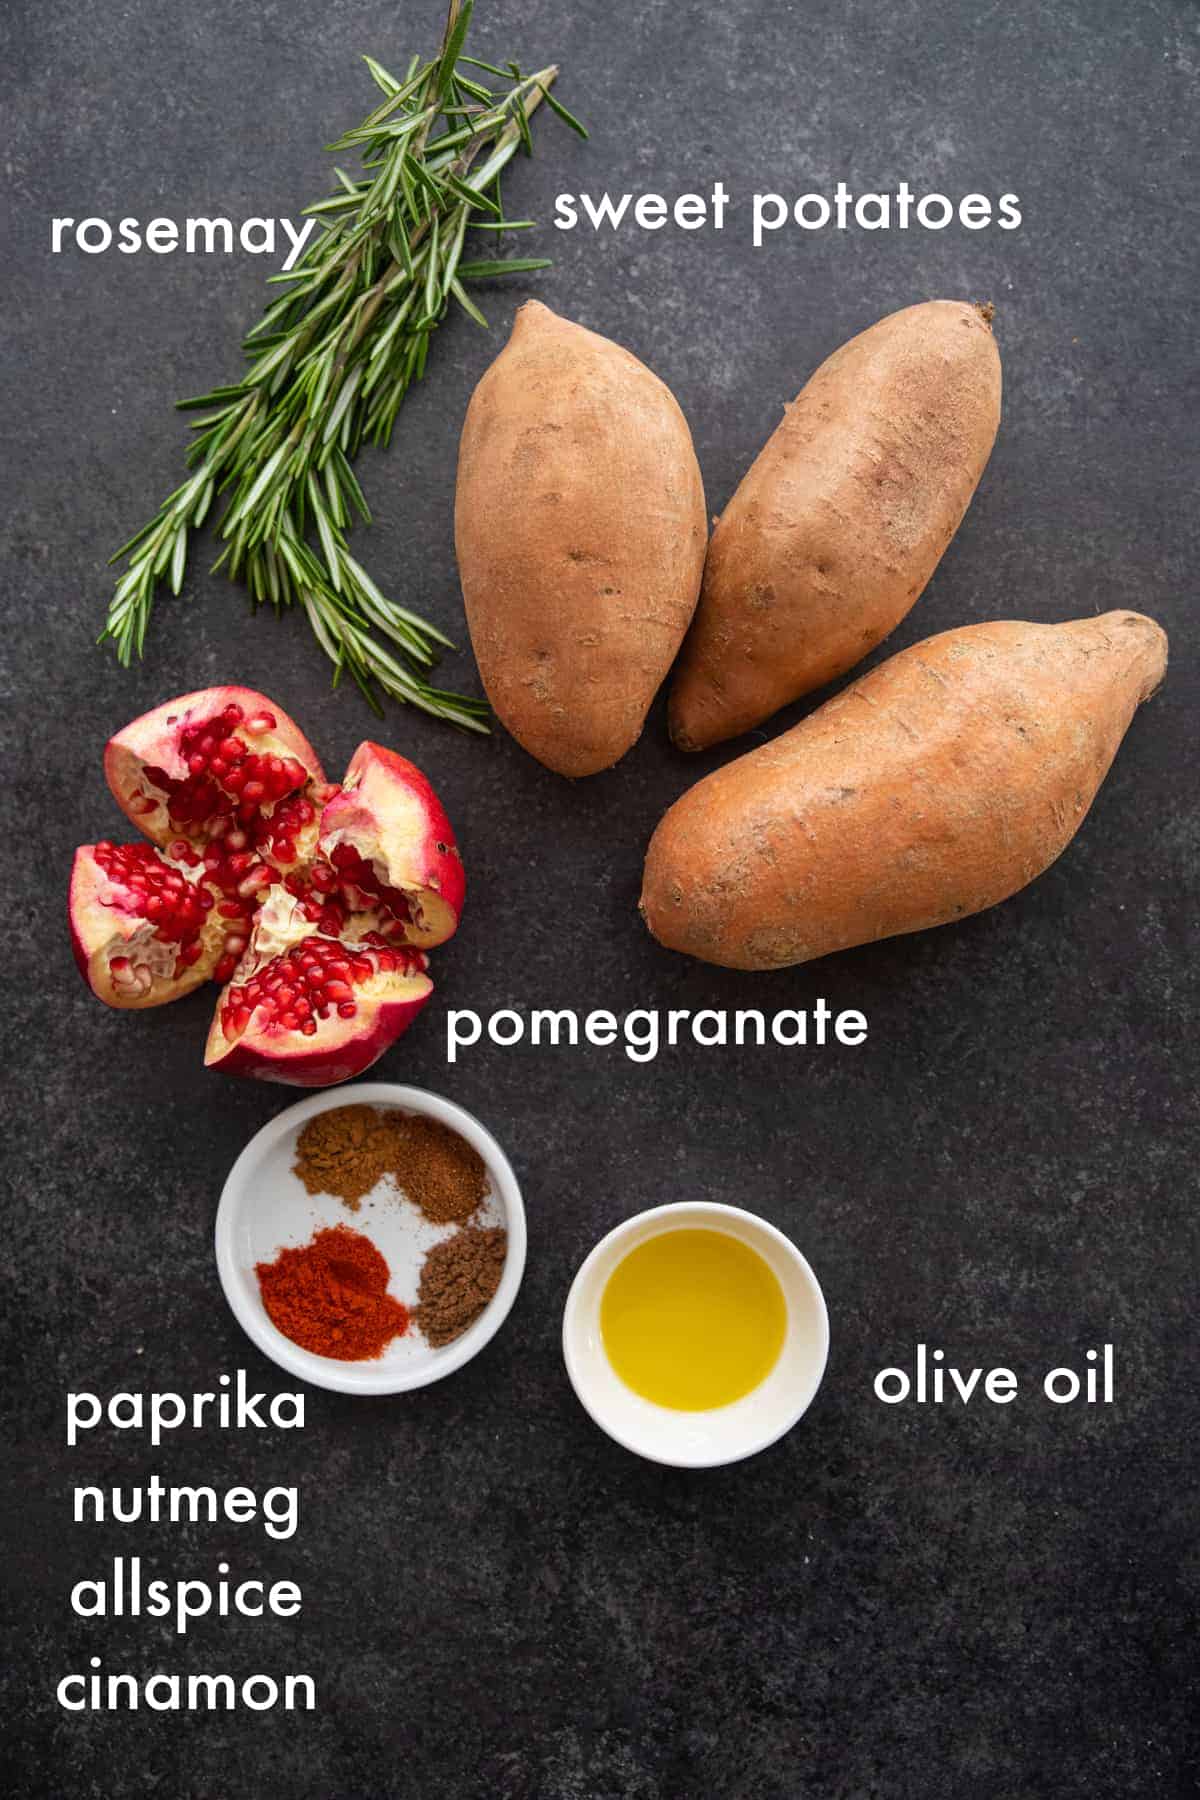 to make this recipe you need sweet potatoes, rosemary, olive oil, spices and pomegranate arils. 